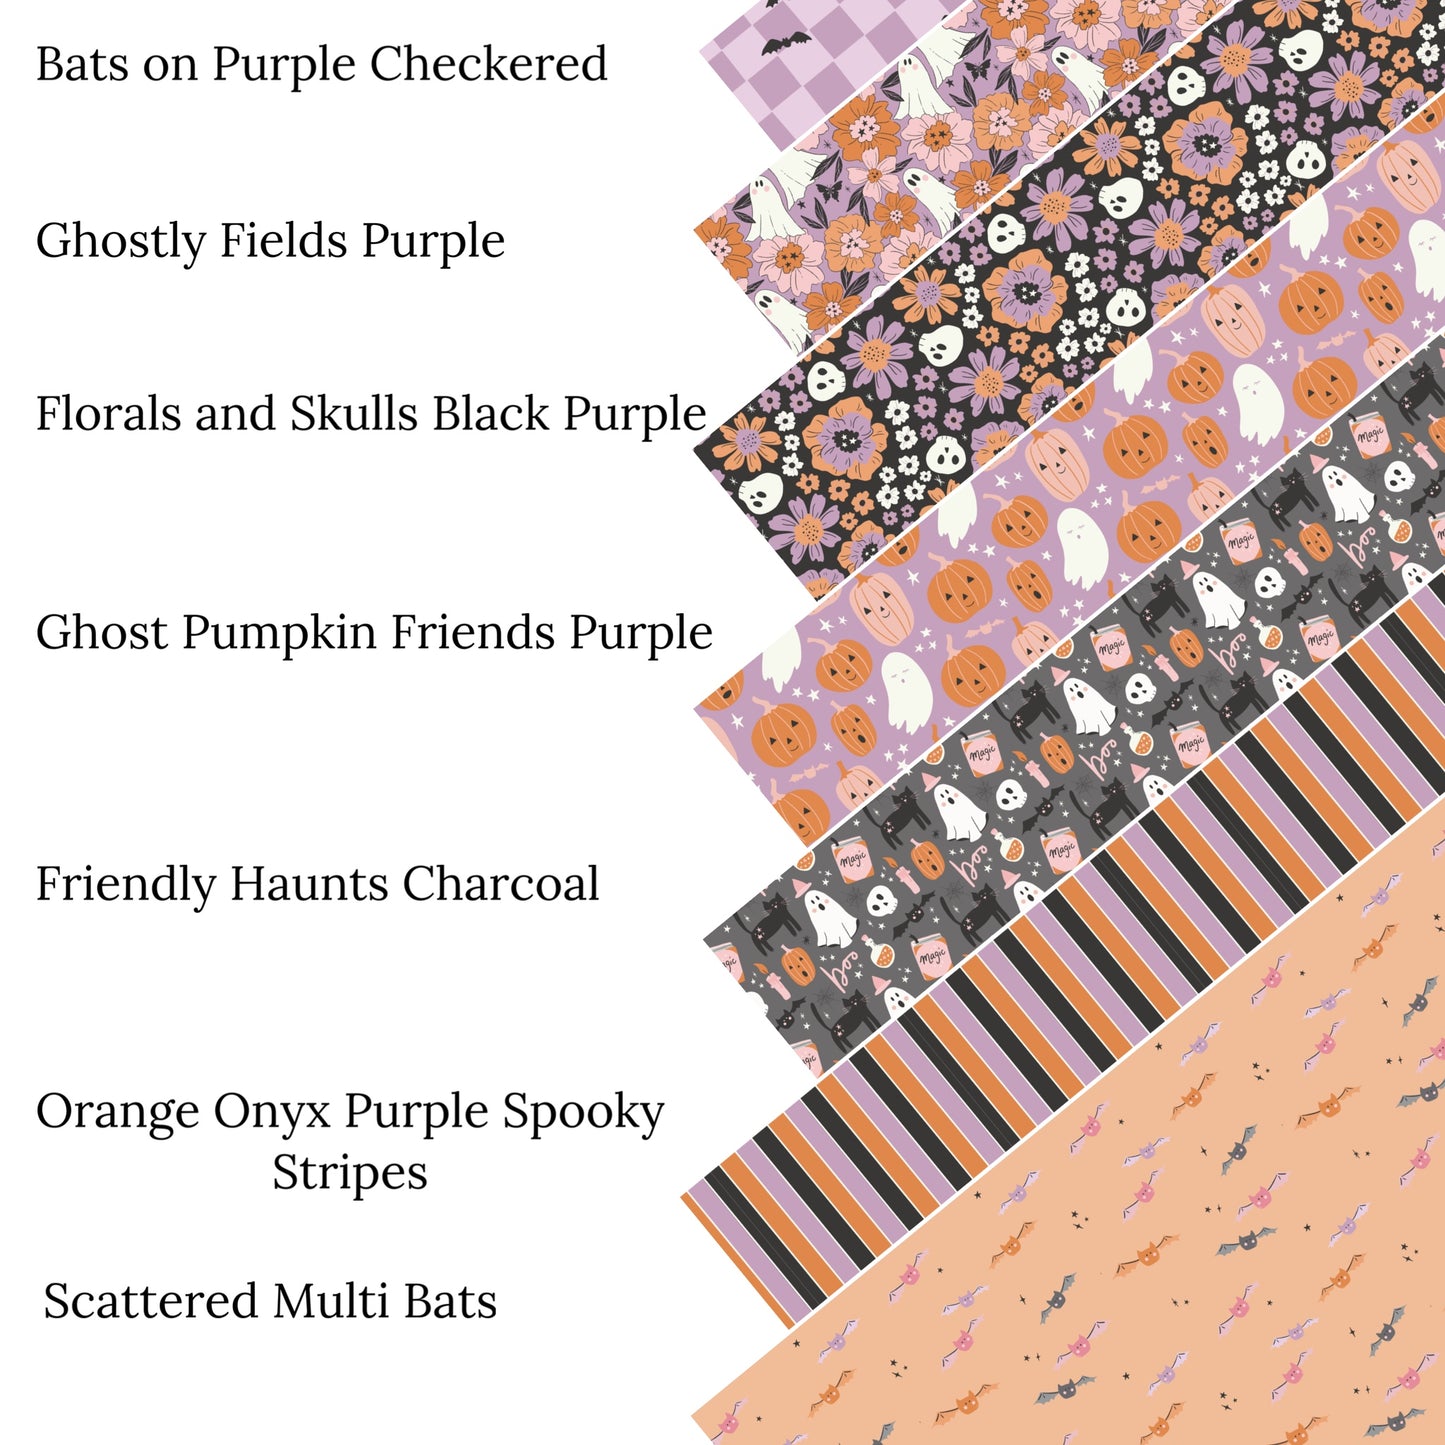 Ghostly Fields Purple Faux Leather Sheets